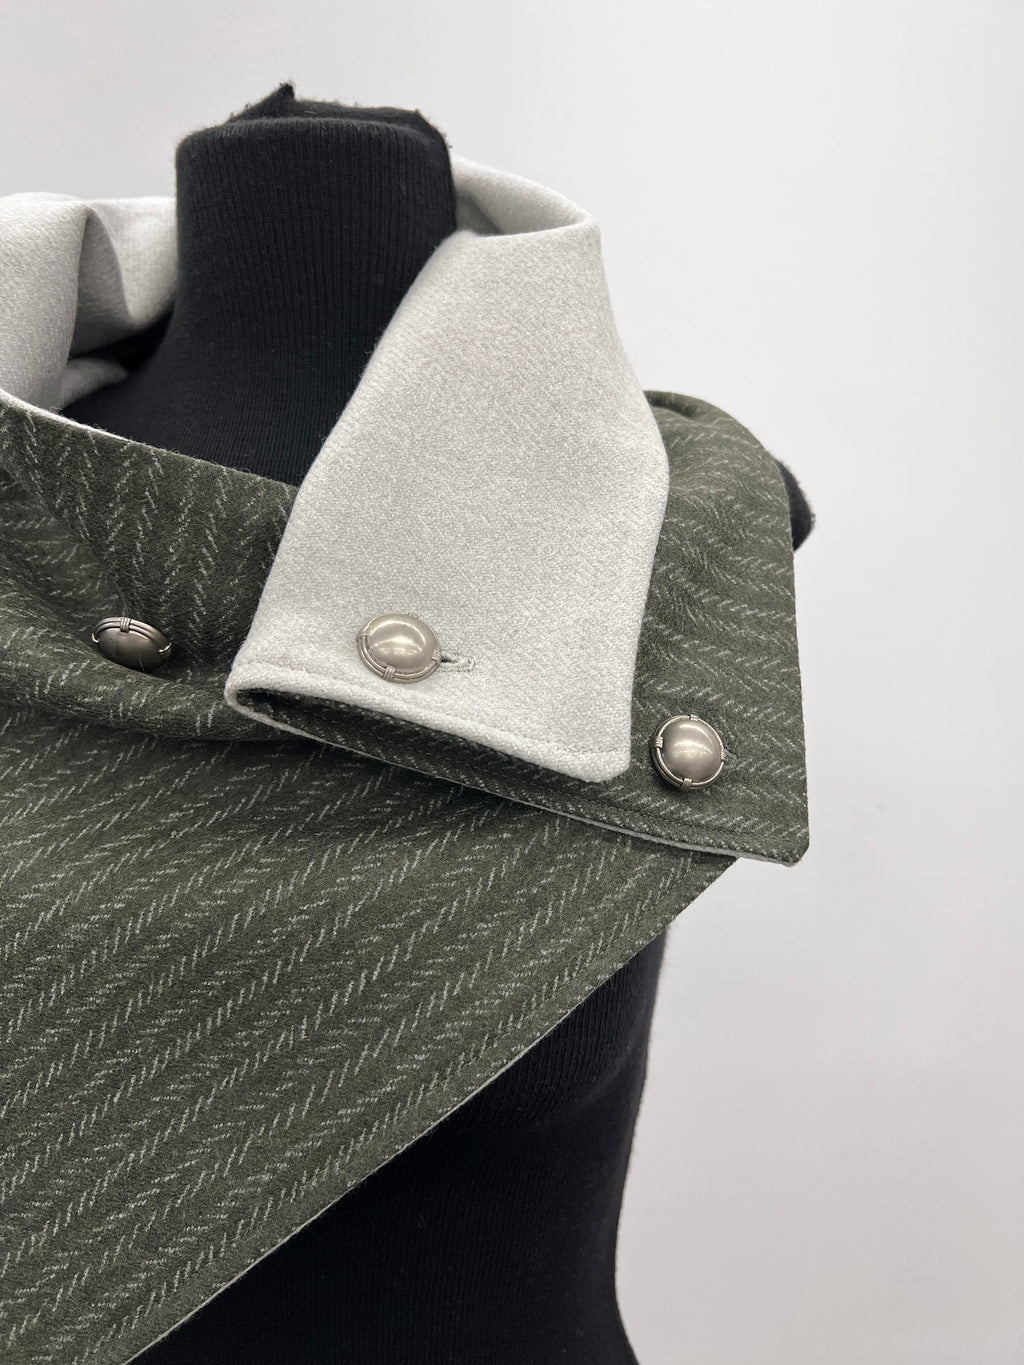 Toula | Three Button Scarf | Olive Green Gray Cashmere